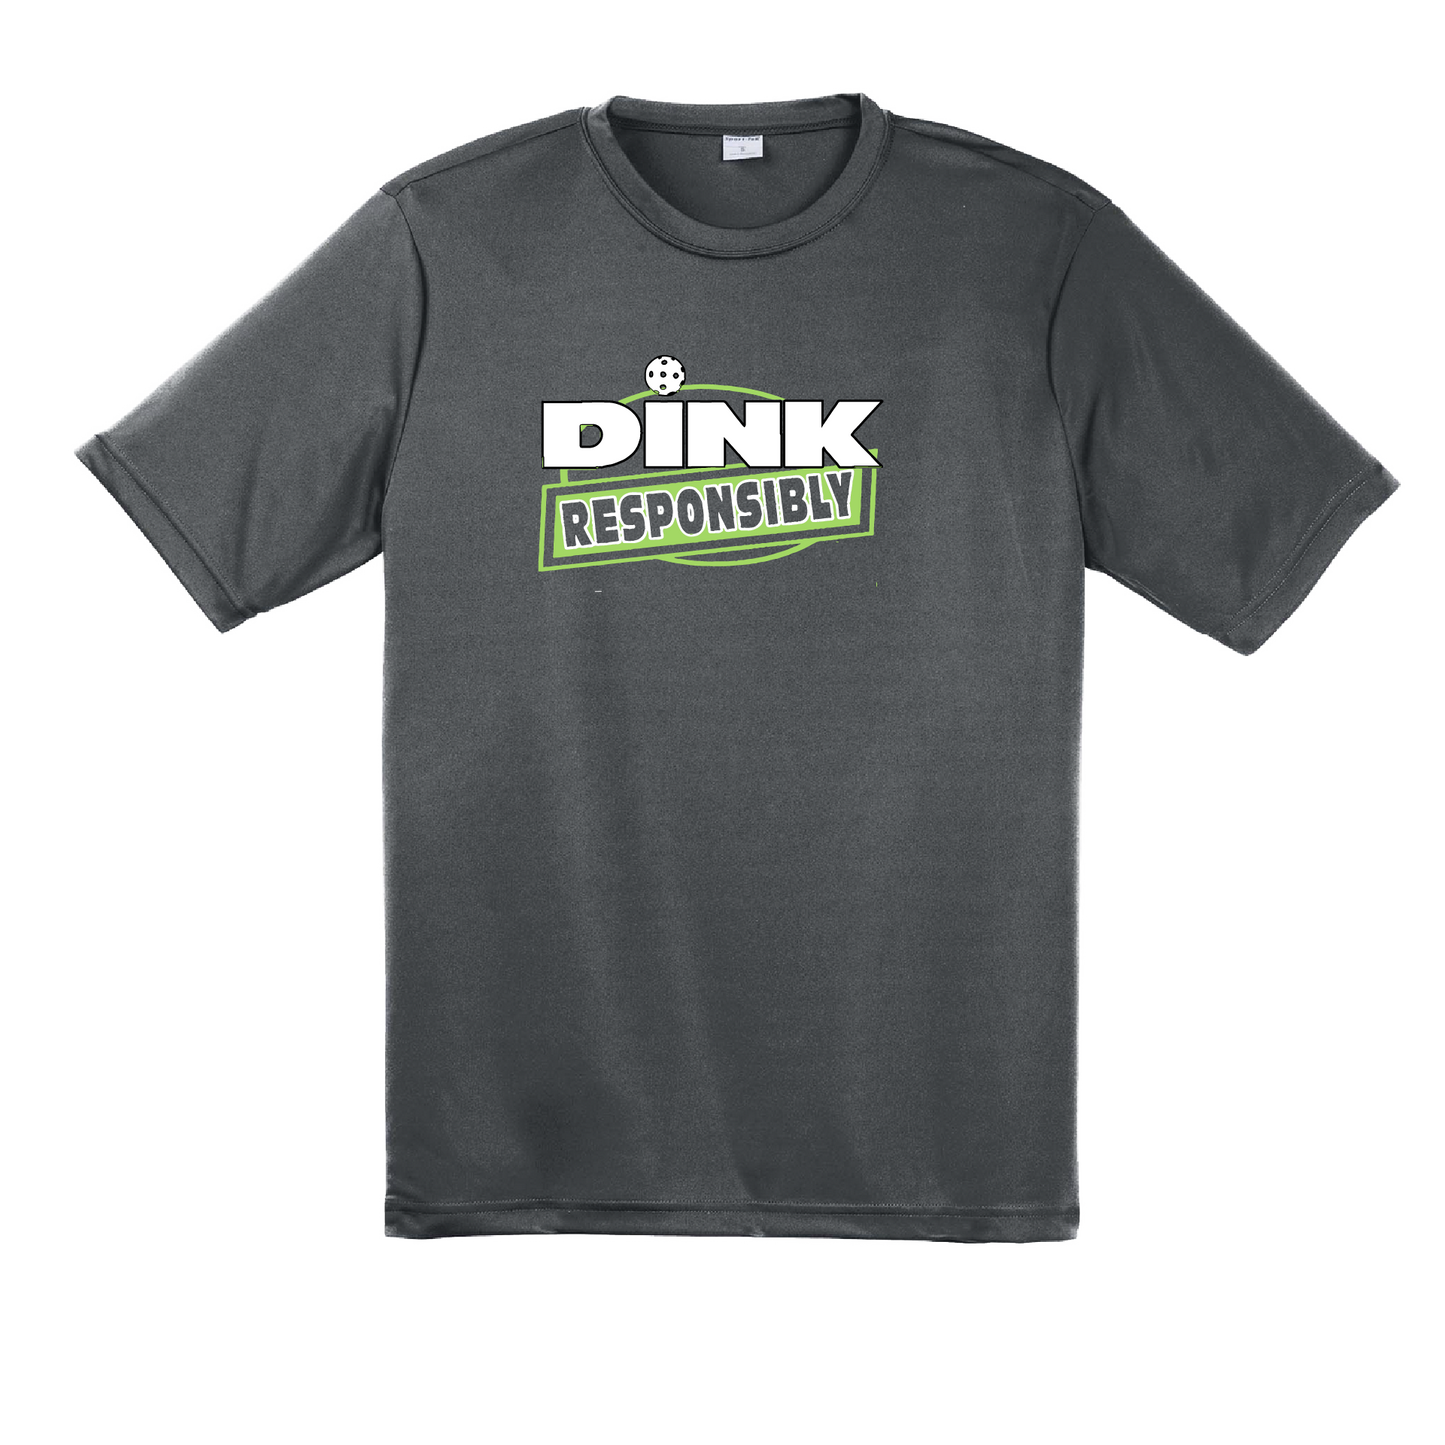 Pickleball Design: Dink Responsibly  Men's Style: Short Sleeved   Shirts are lightweight, roomy and highly breathable. These moisture-wicking shirts are designed for athletic performance. They feature PosiCharge technology to lock in color and prevent logos from fading. Removable tag and set-in sleeves for comfort.